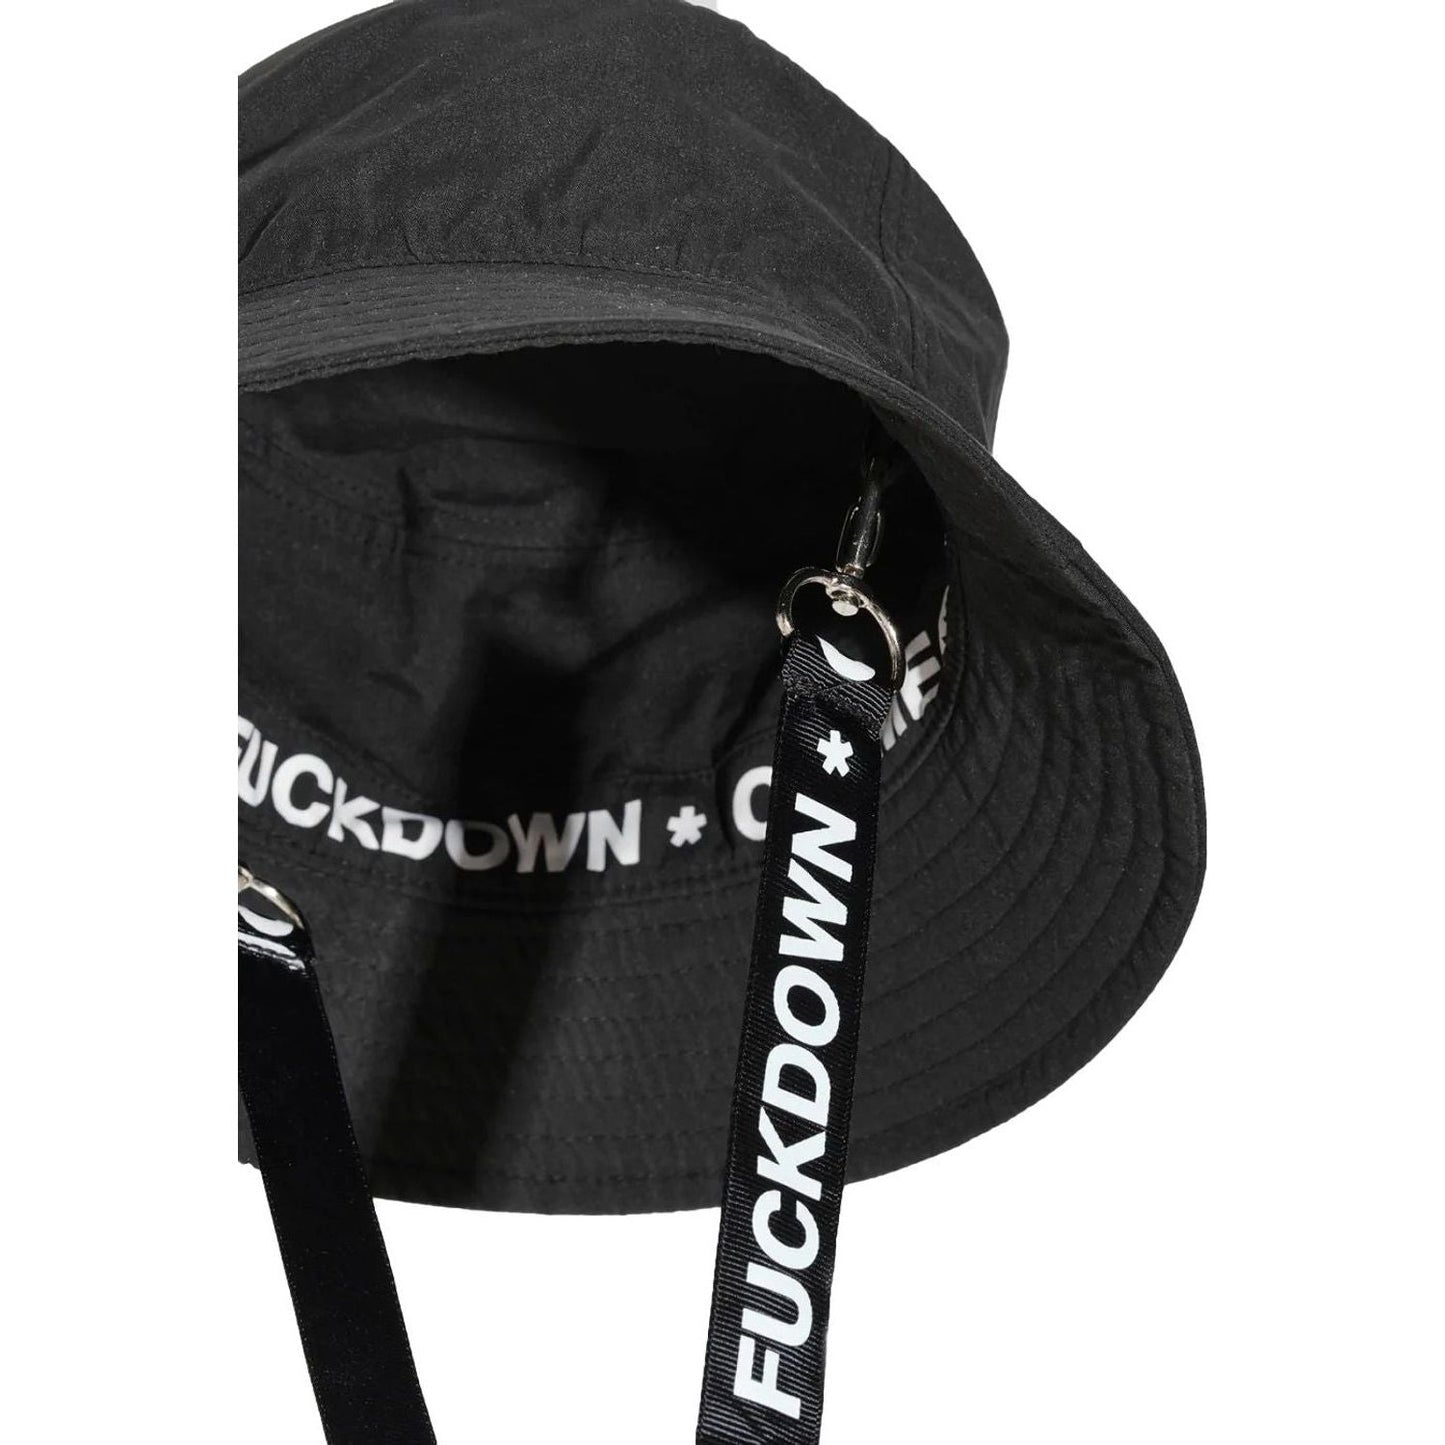 Comme Des Fuckdown Sleek Nylon Fisherman Hat with Iconic Stitched Logo black-polyester-hats-cap product-8449-121347478-e9cfb0e0-1dc.jpg